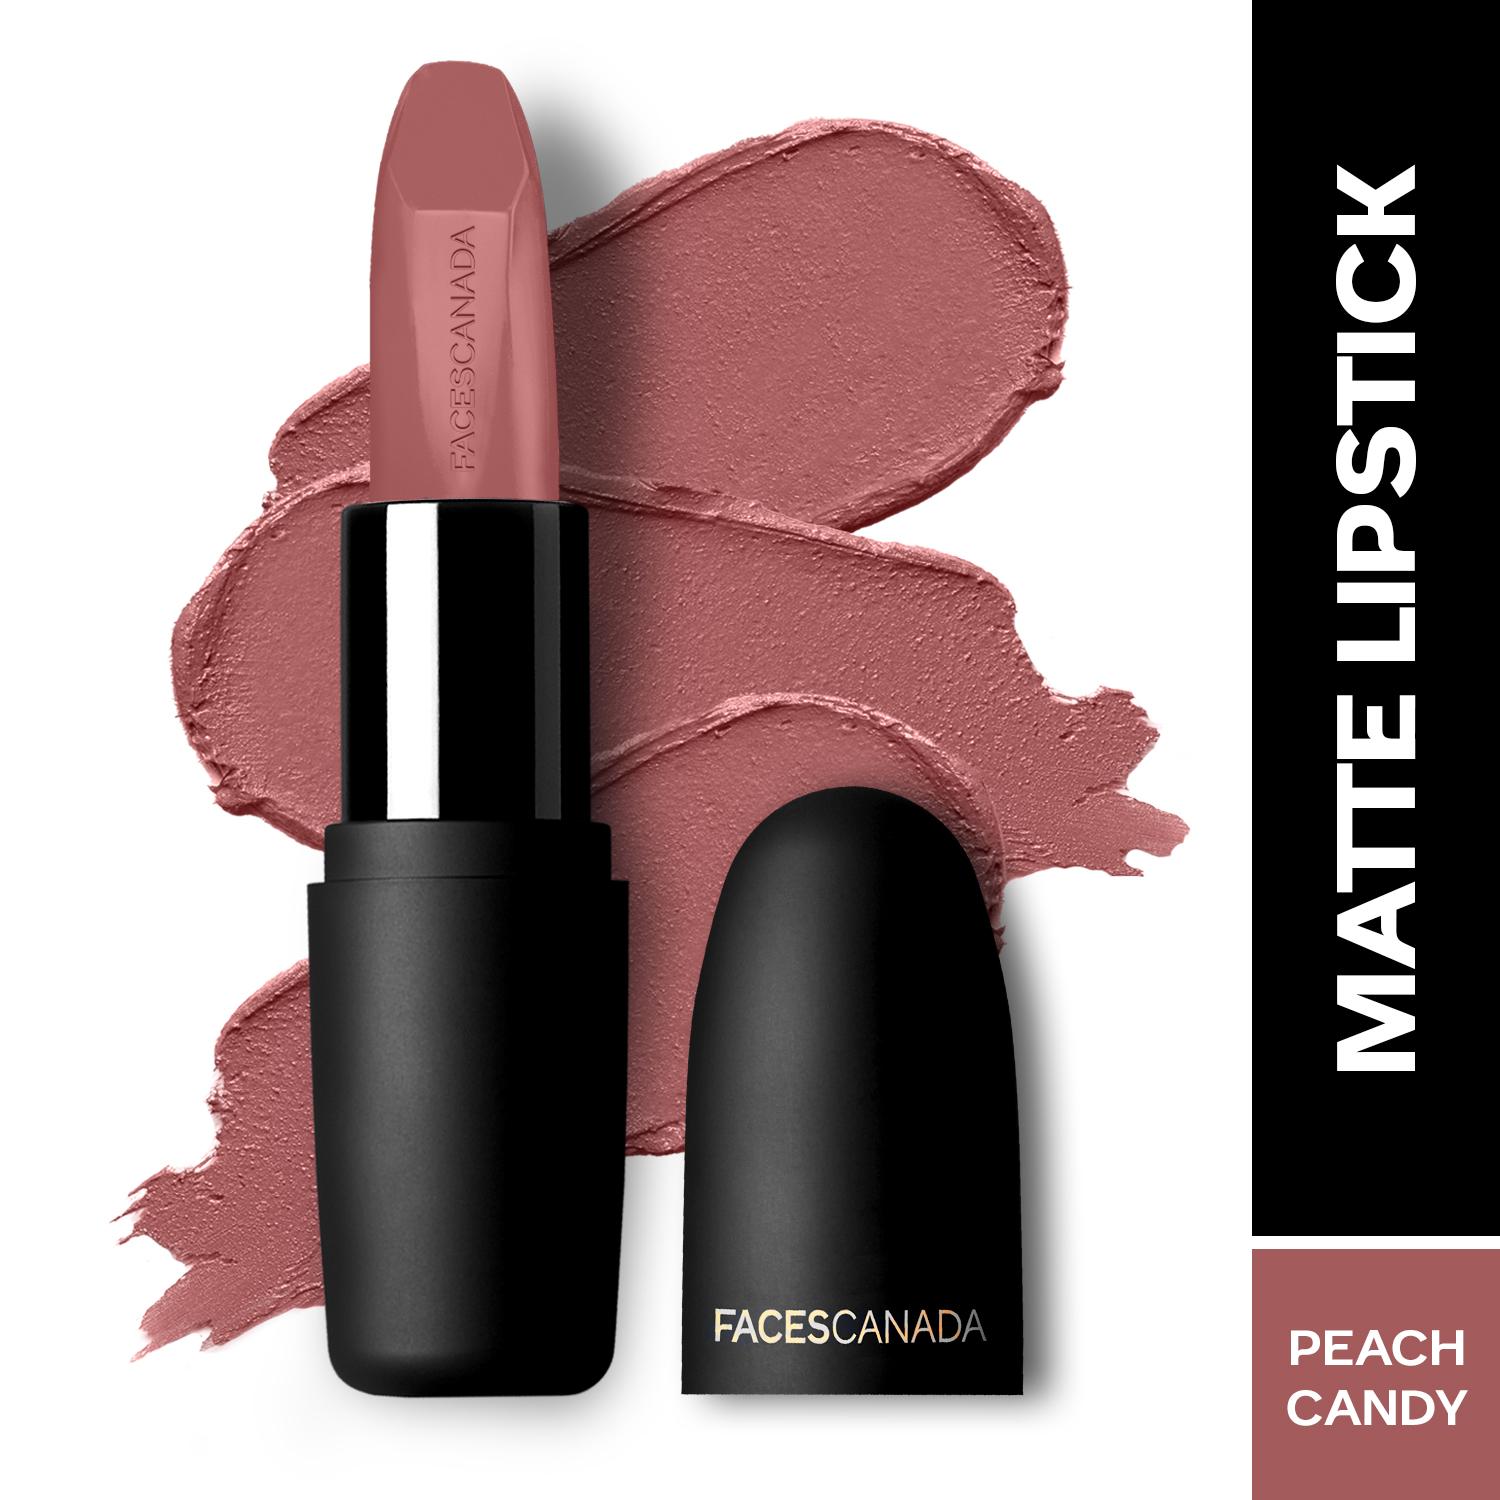 Faces Canada | Faces Canada Weightless Matte Lipstick, Pigmented and Hydrated Lips - Peach Candy 14 (4.5 g)